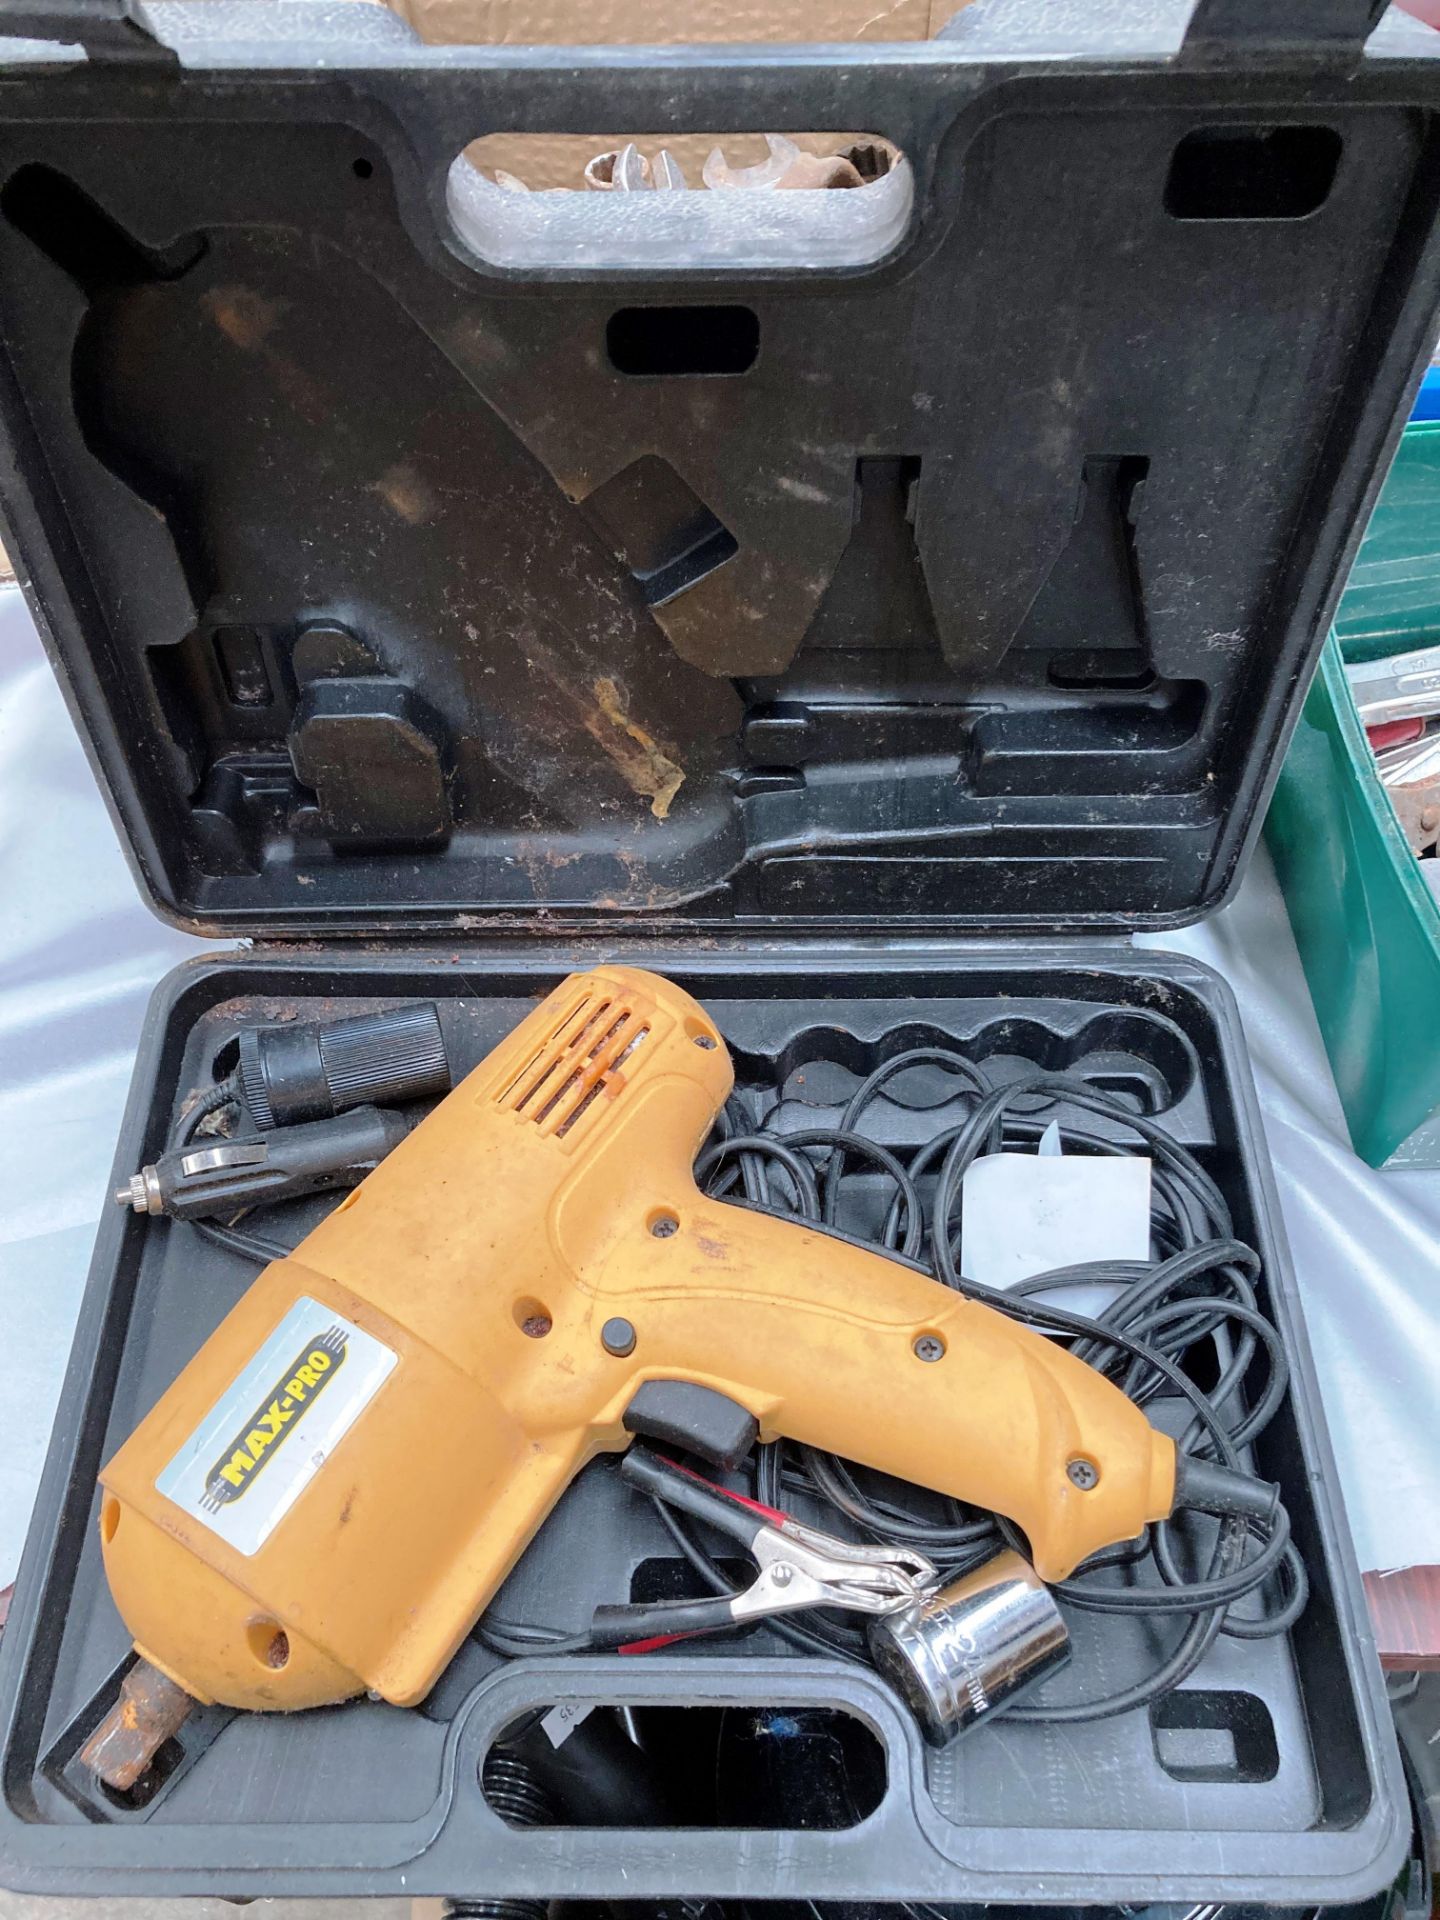 A Max Pro 12 volt impact wrench in black plastic case